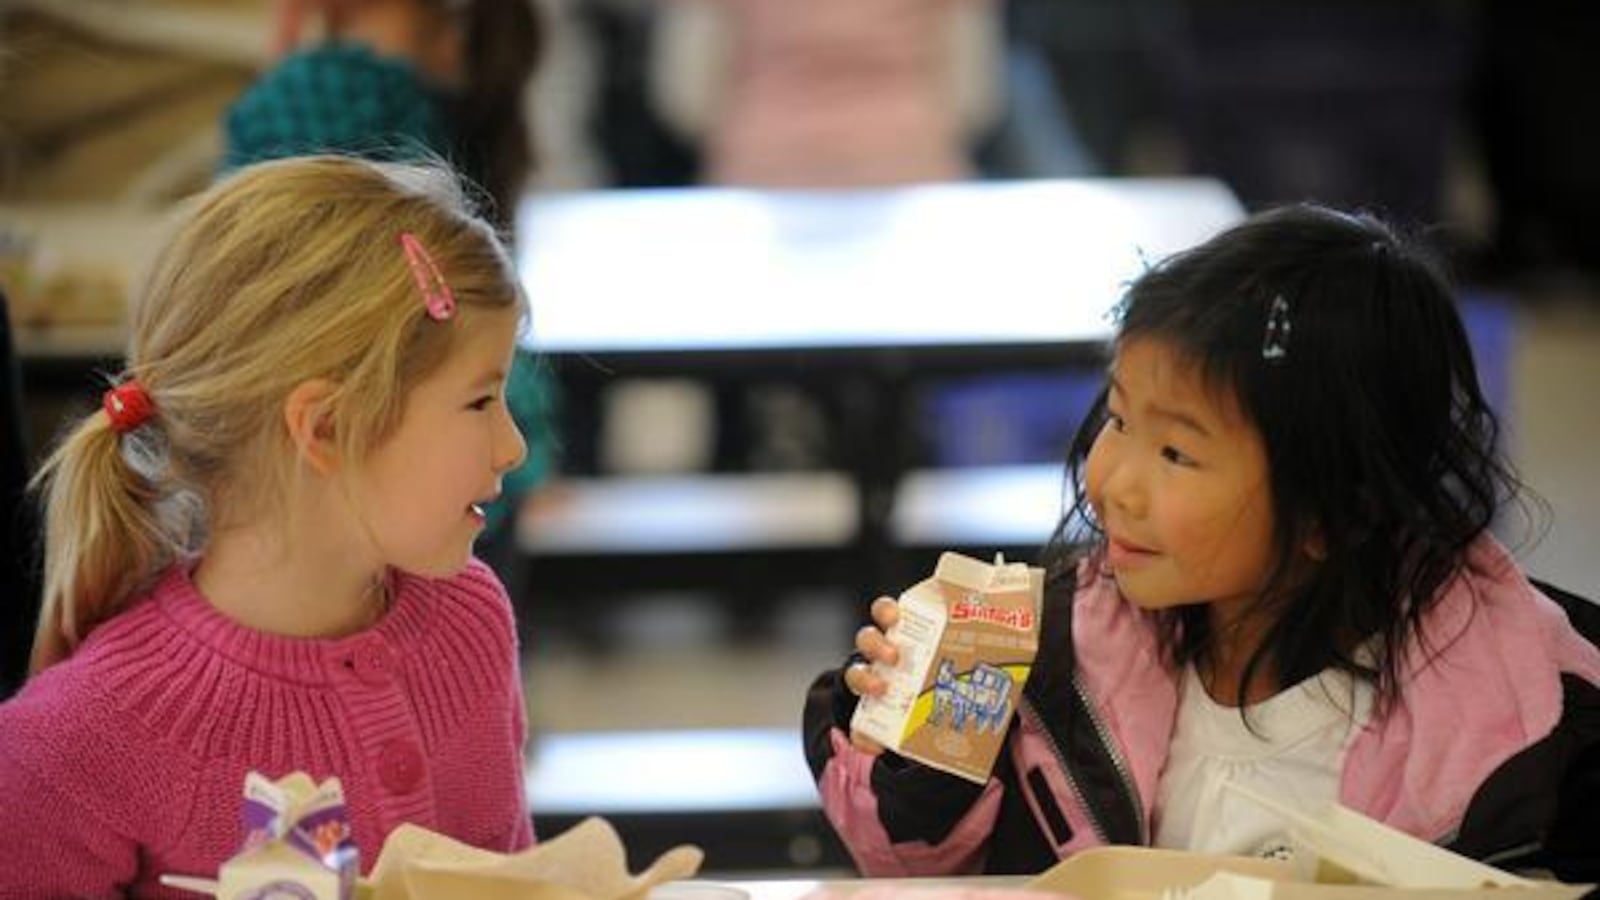 Six-year-olds Lilly Clark, left, and Zoe Burger talk during lunch at Lincoln Elementary School in Denver.